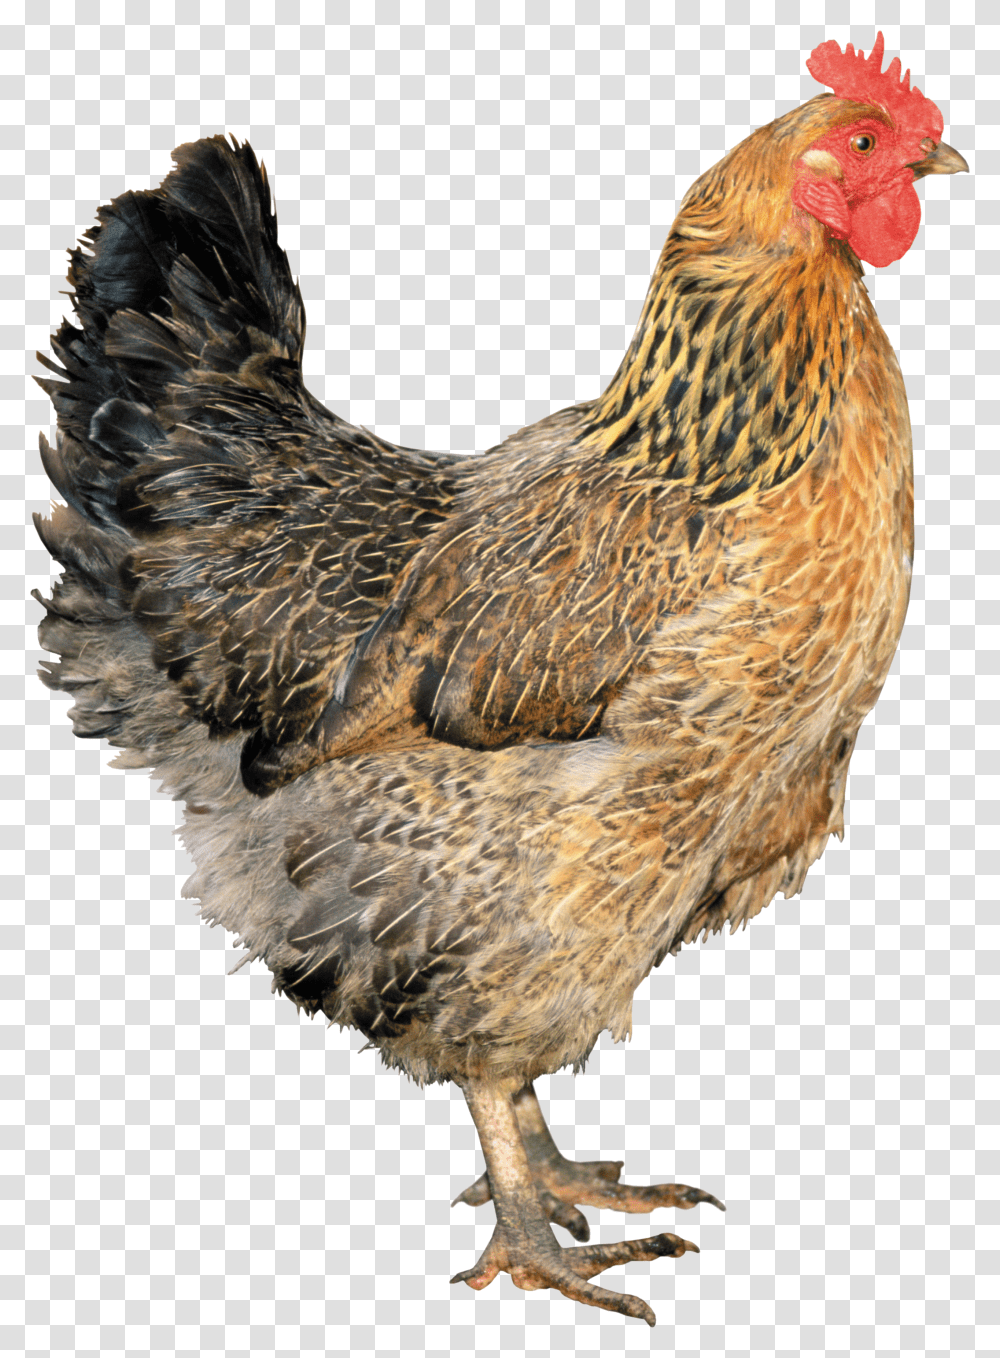 Download Gallo Gallina Animales Chicken Transparent Png